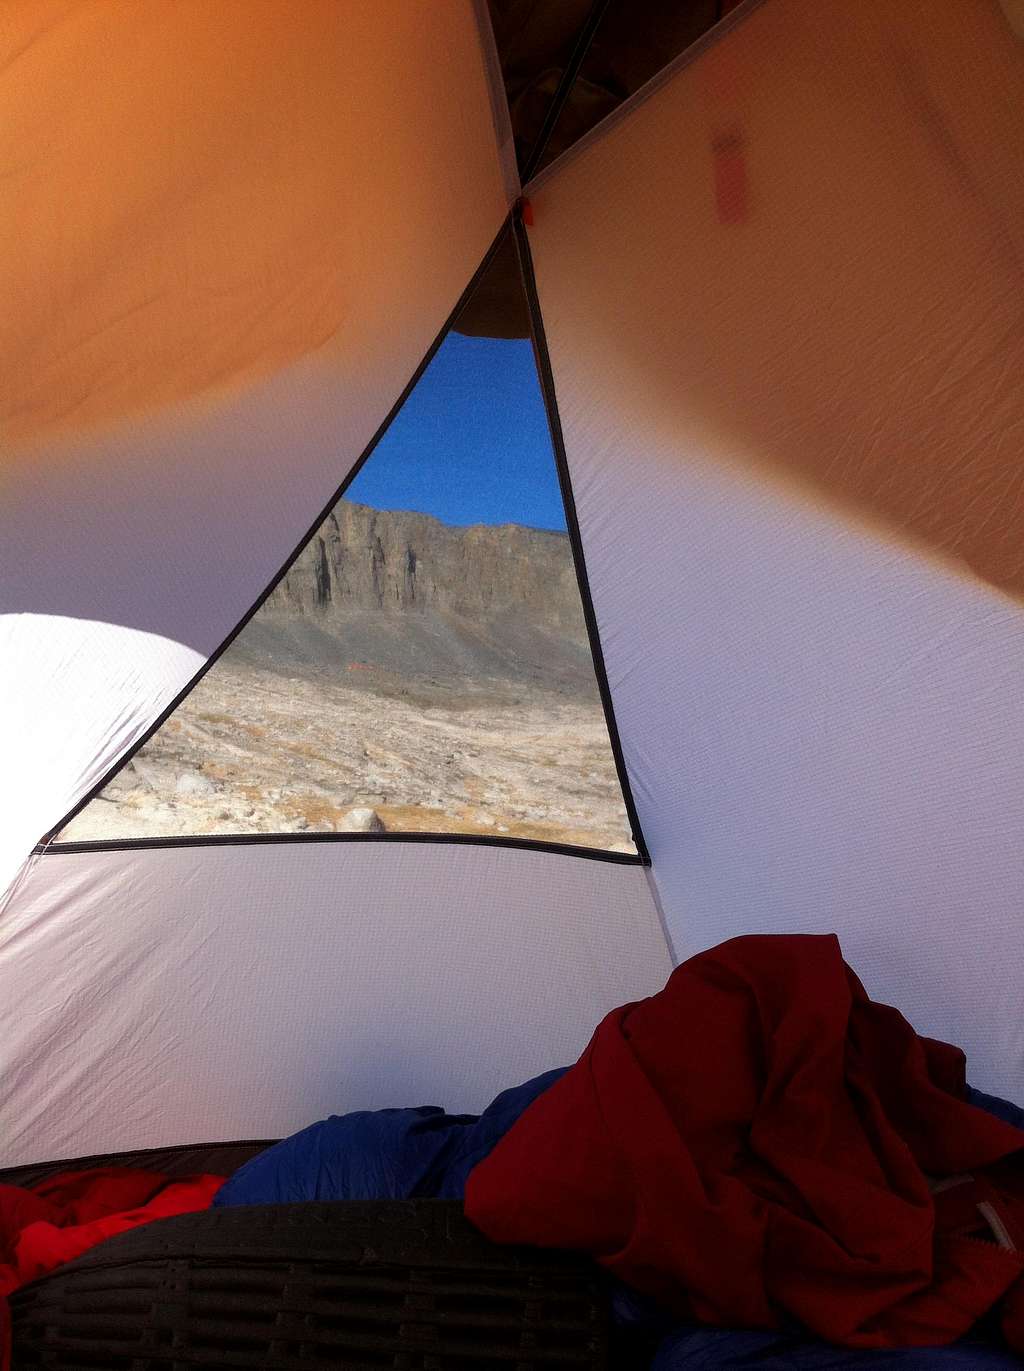 view from the tent in the back-country